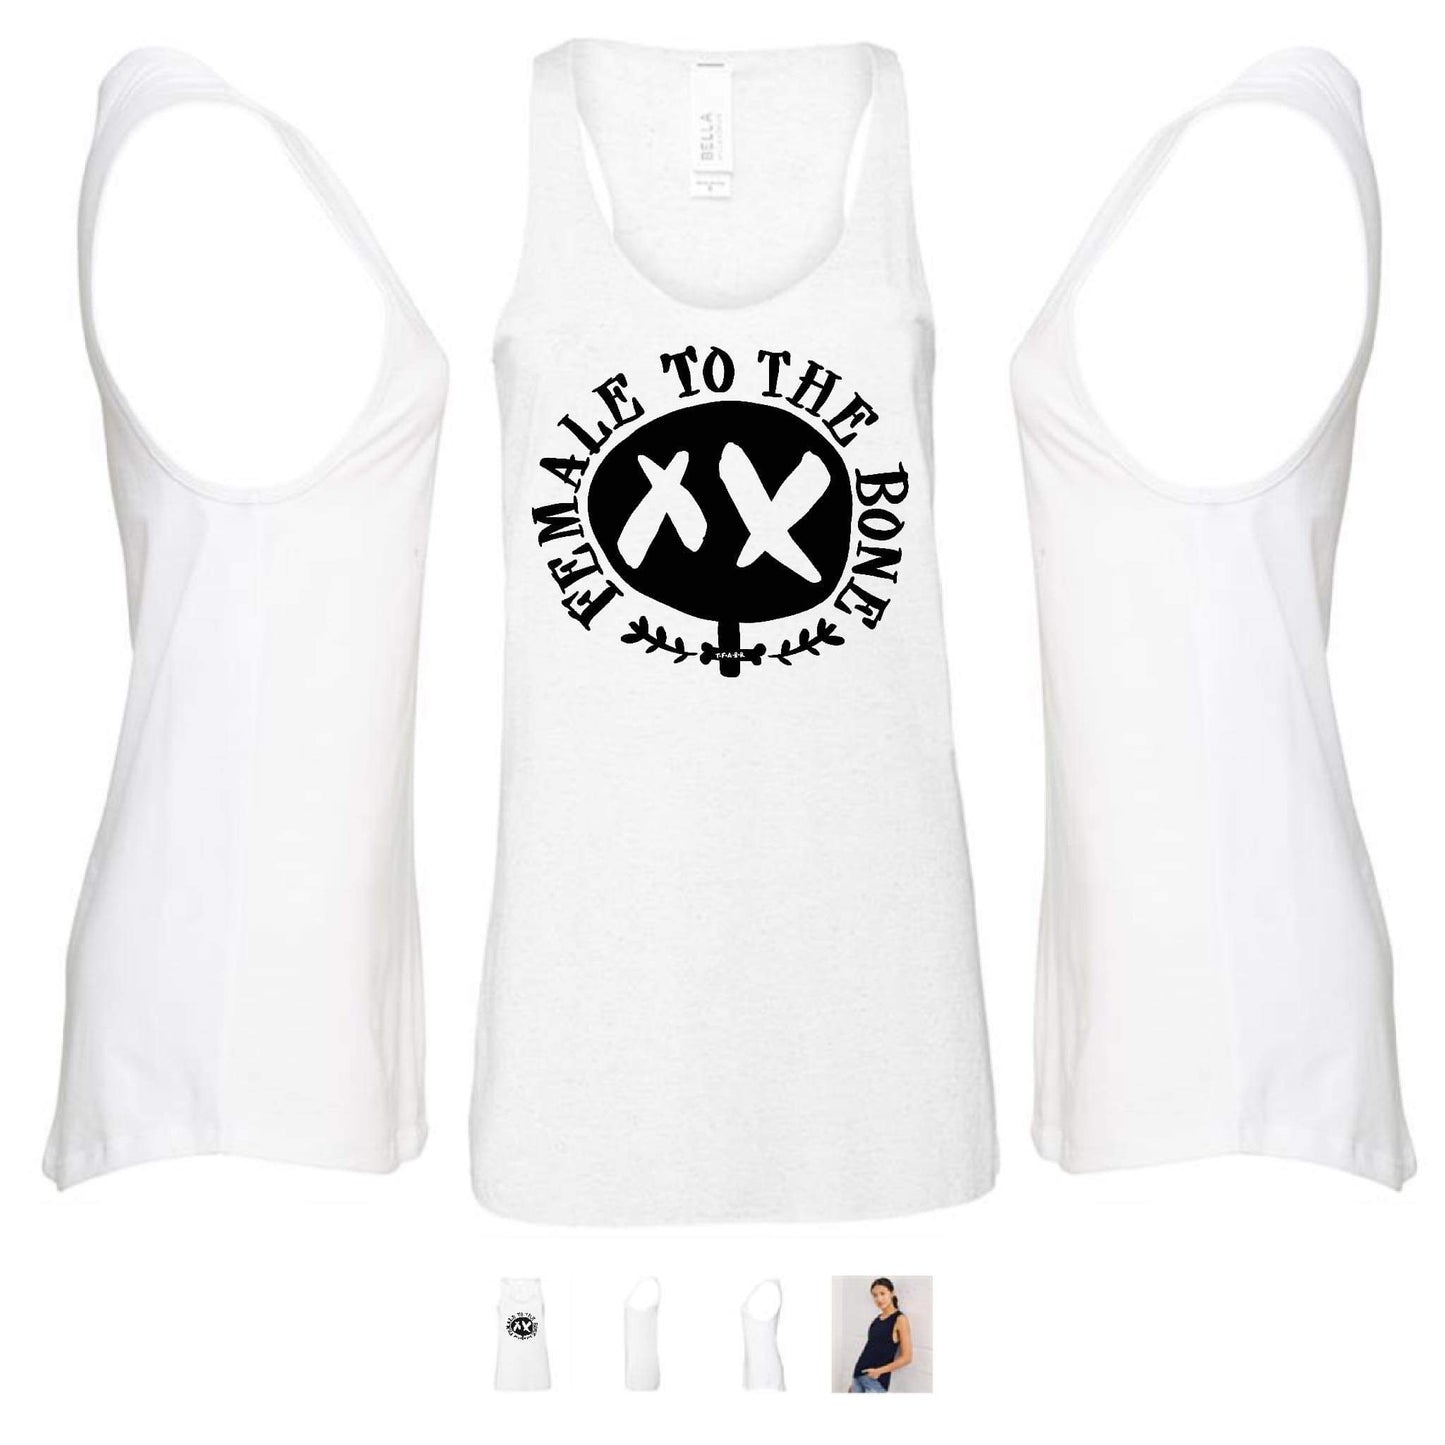 Female To The Bone - Muscle Tank Vest Top